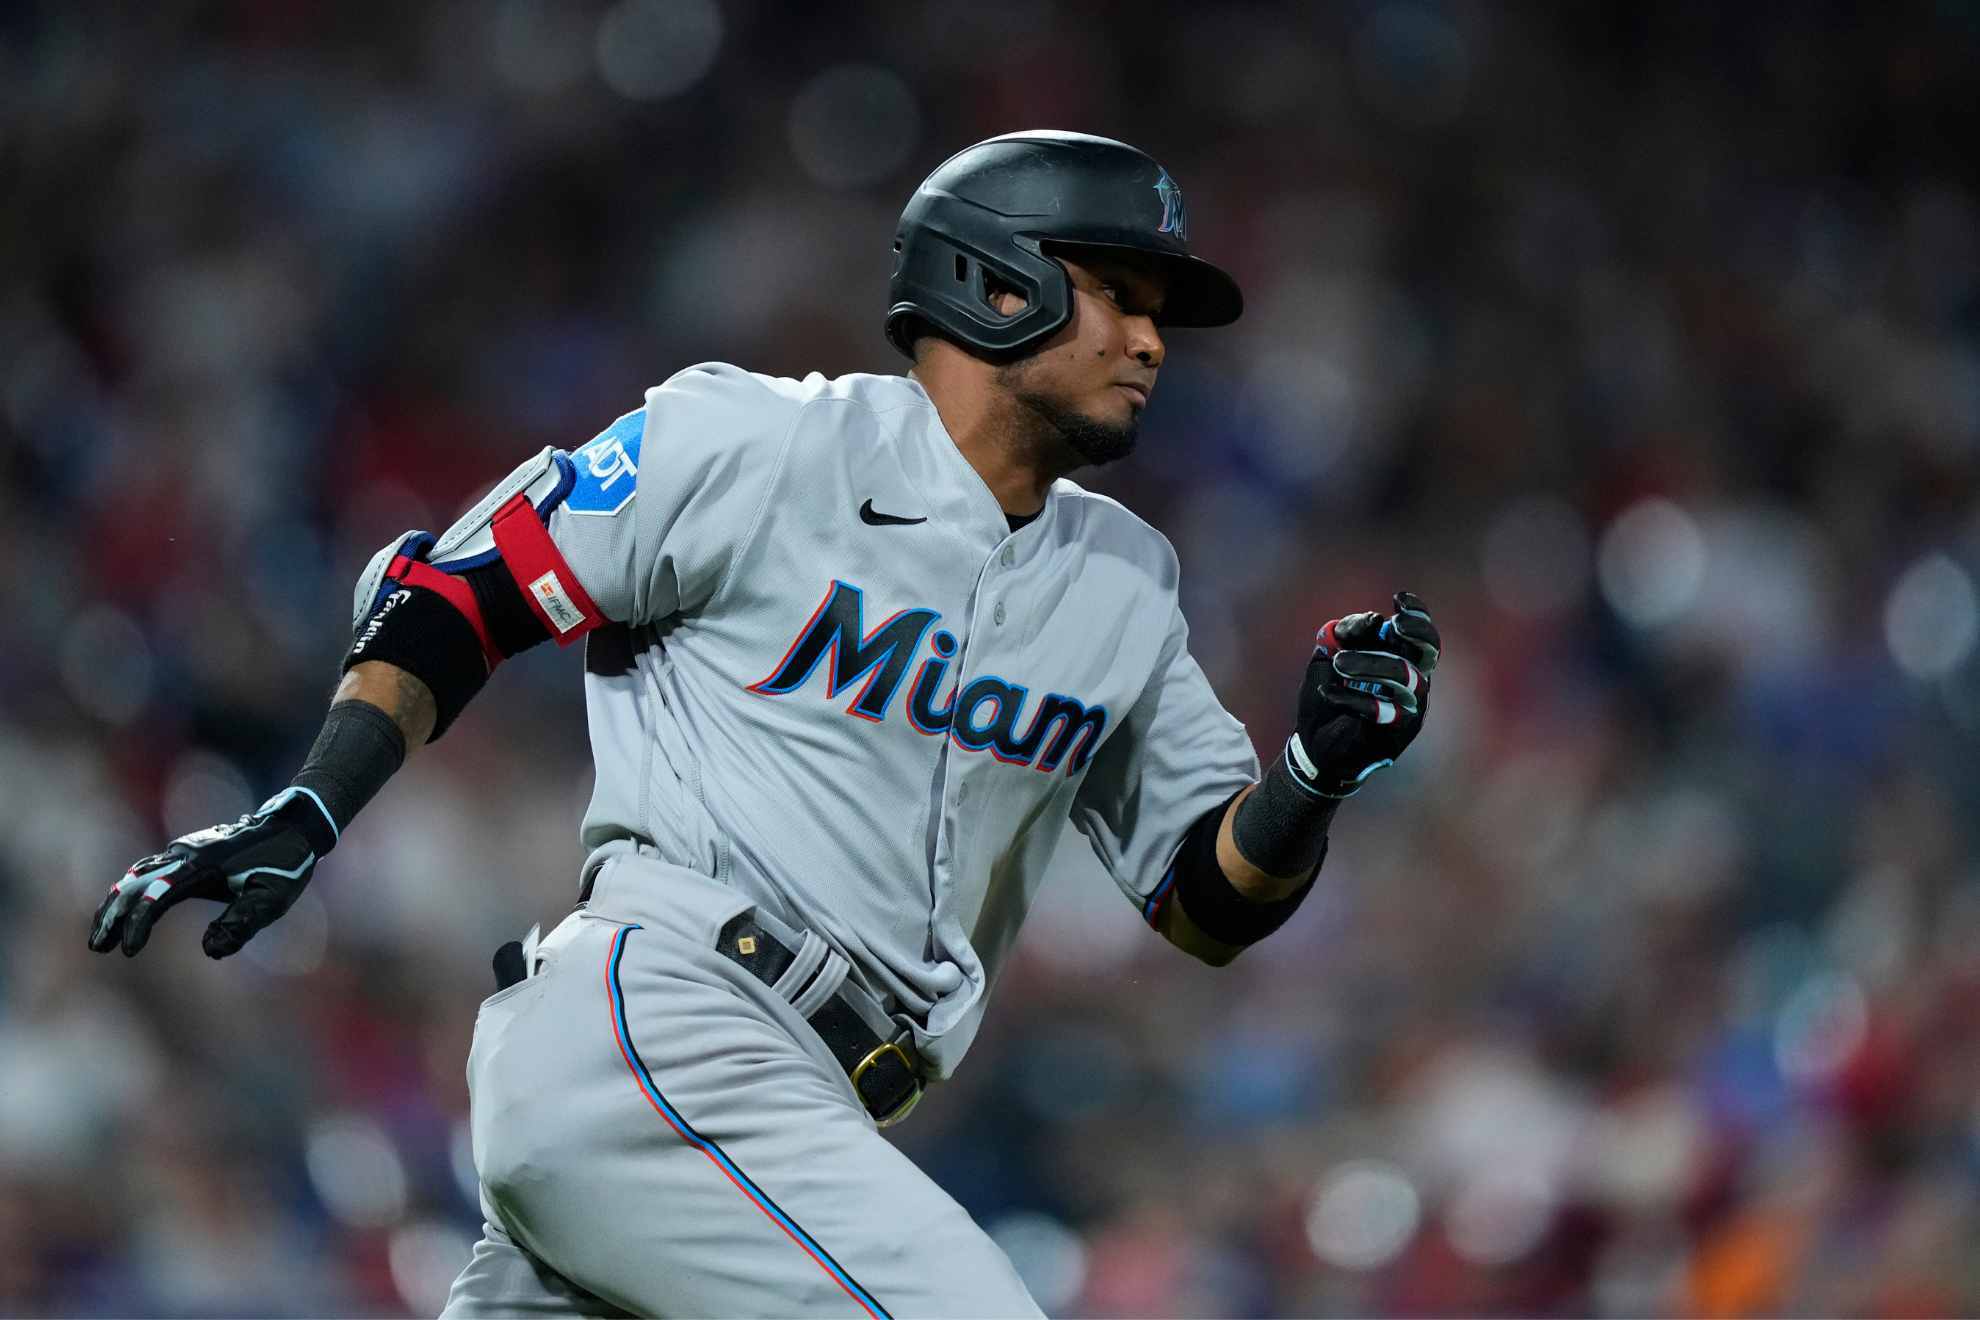 Miami Marlins Luis Arraez made franchise history by hitting the ever-elusive baseball cycle: a single, a double, a triple, and a home run in the same game.